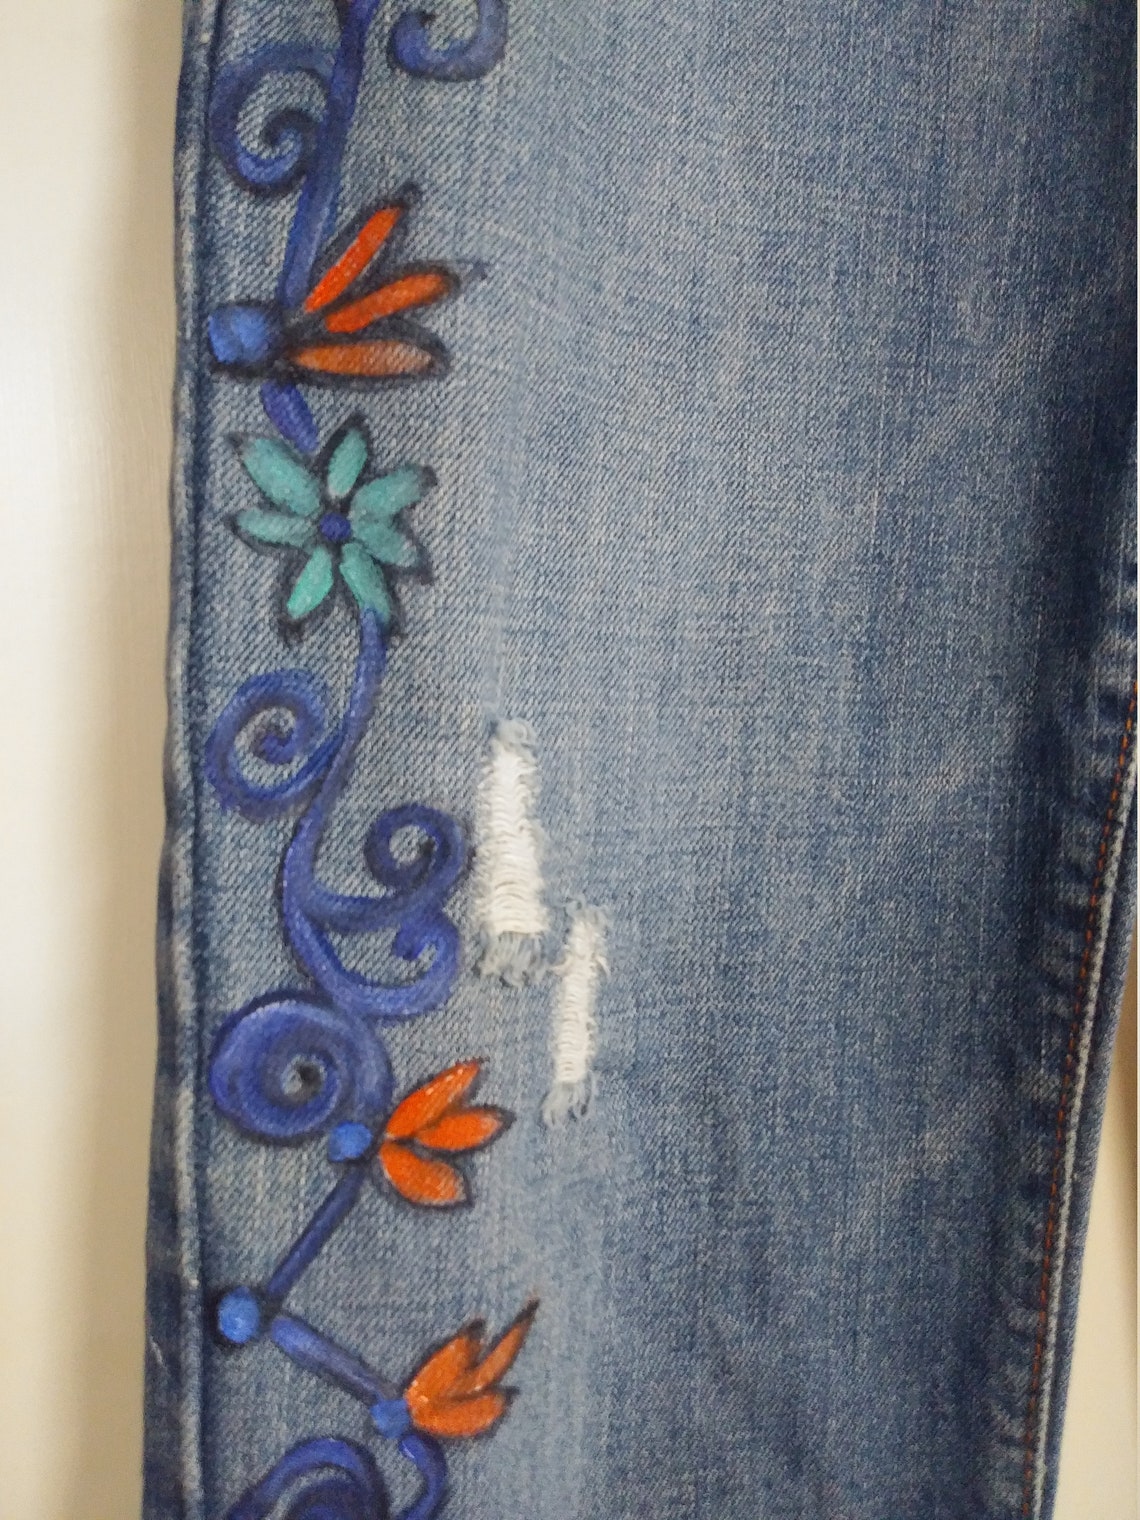 Wearable Art Jeans 70s Art Upcycled Hand Painted Flowers | Etsy